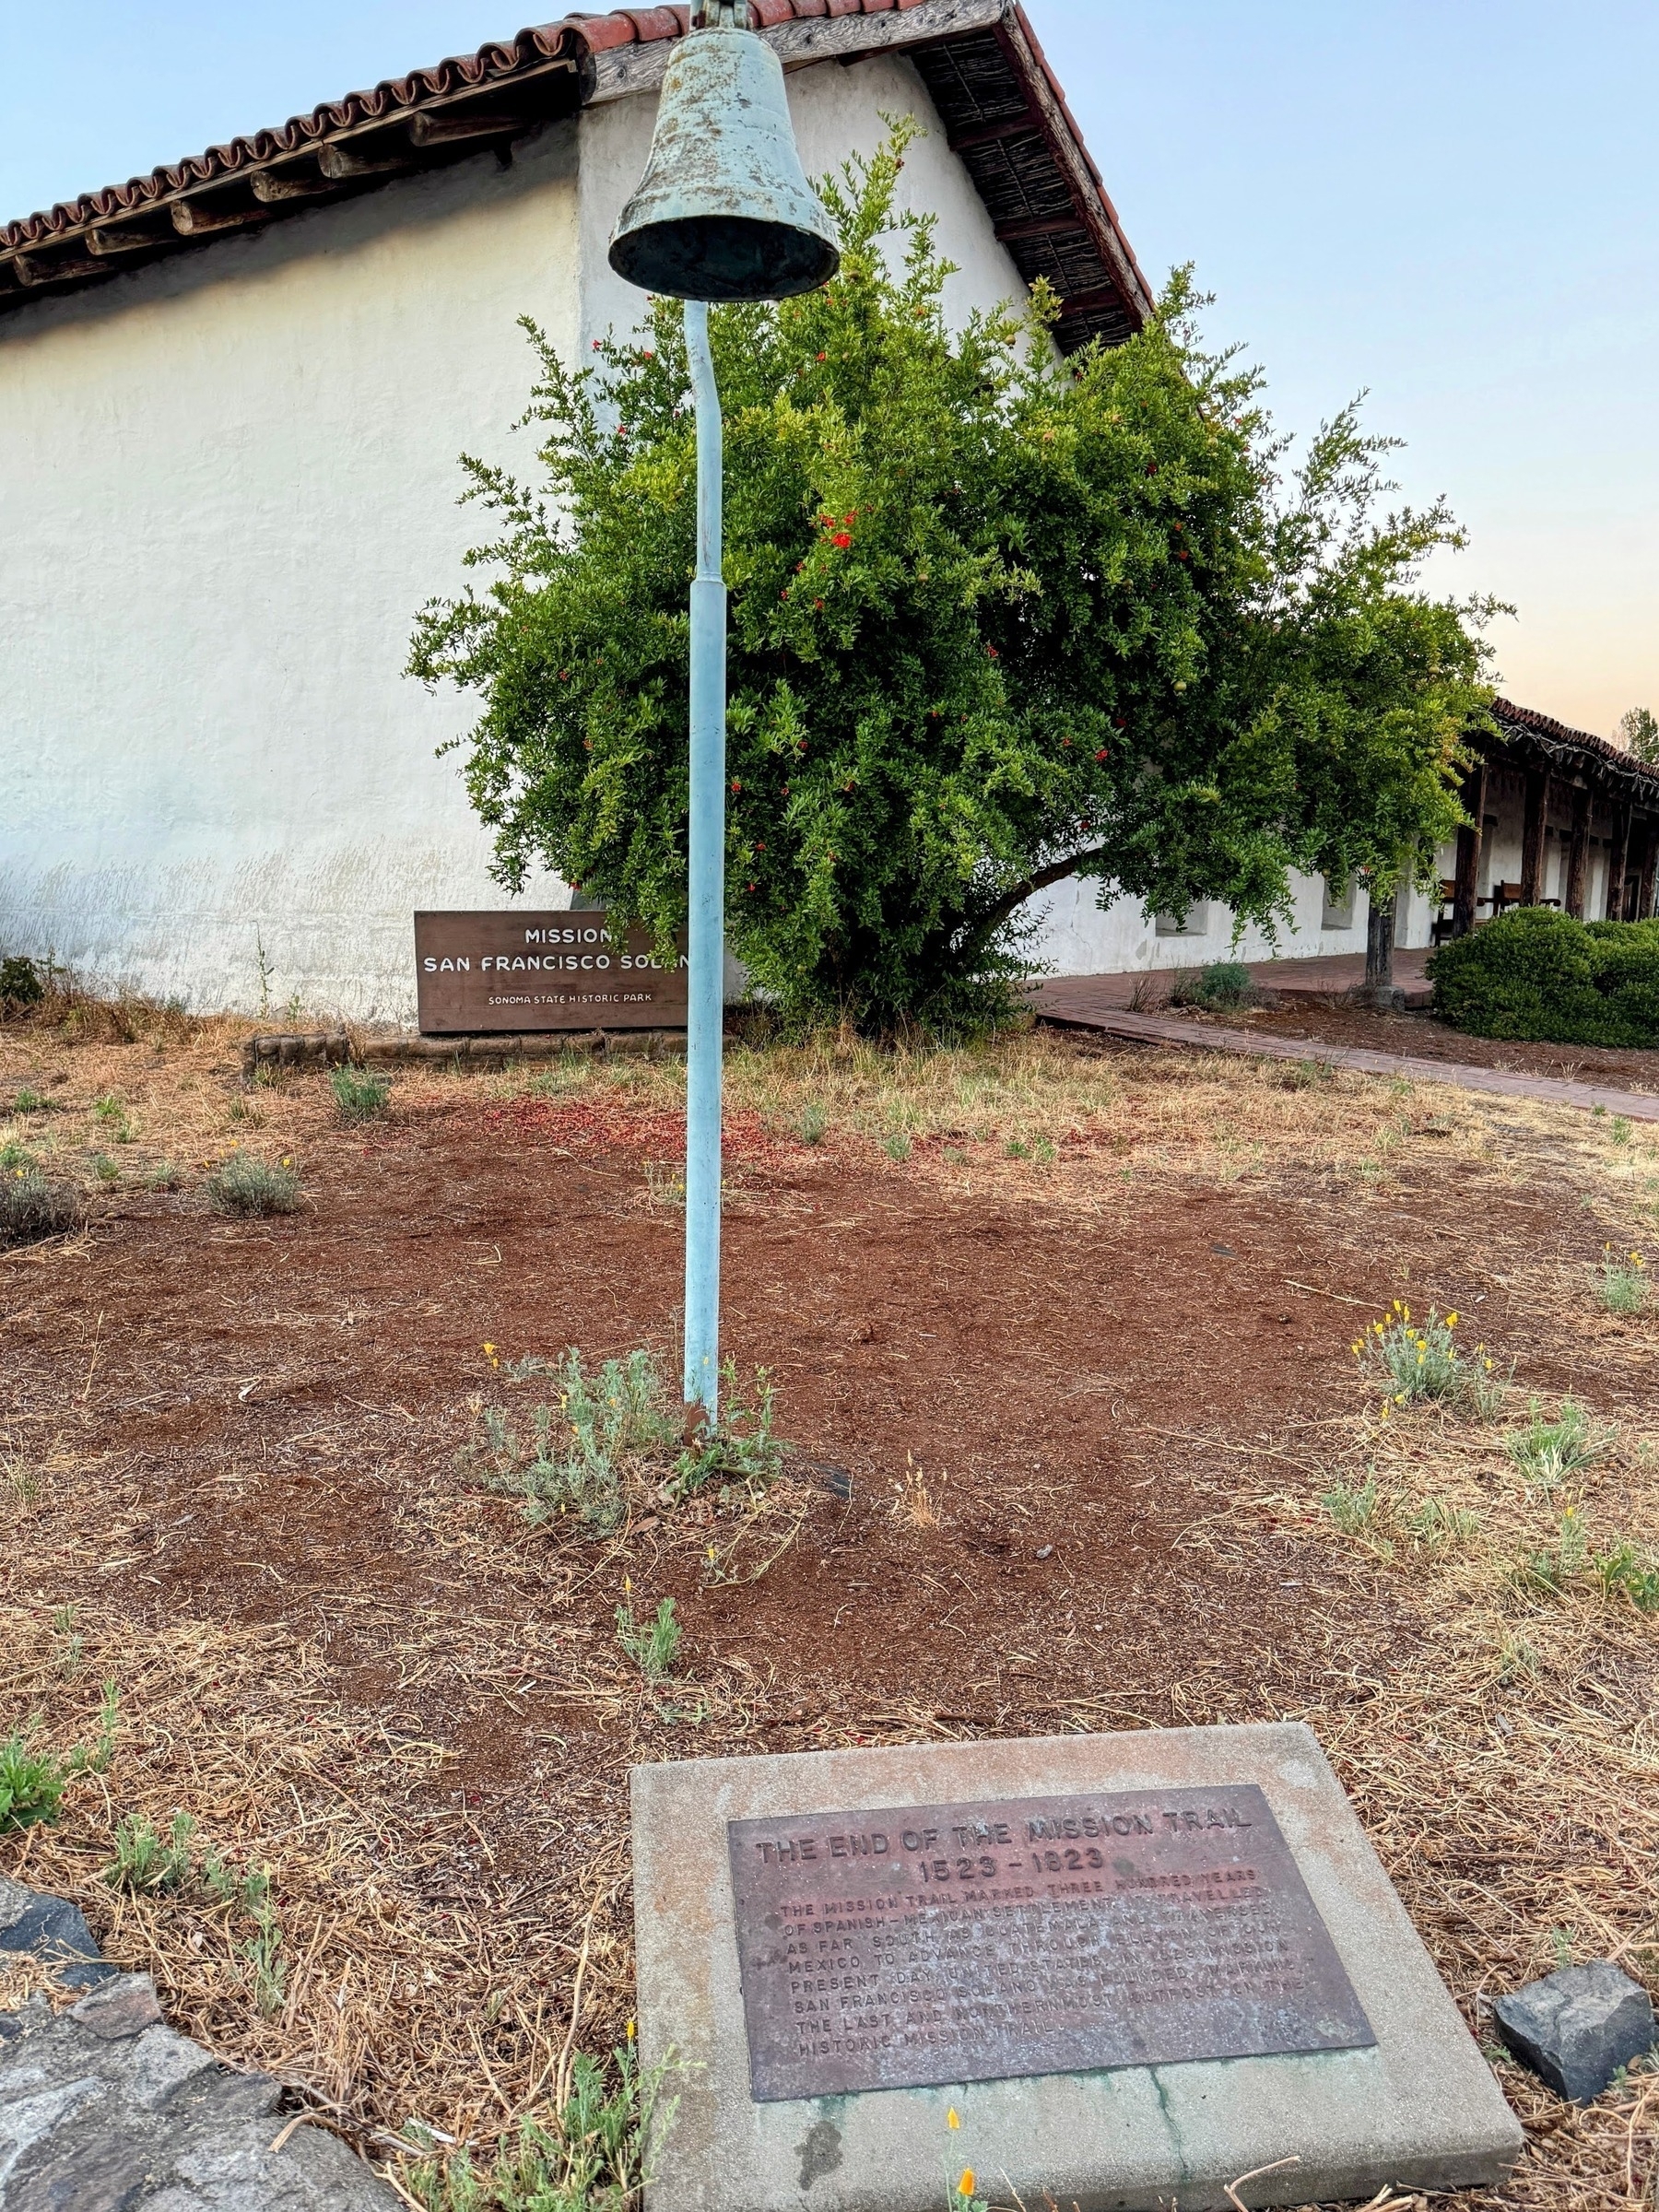 Mission San Francisco Solano in Sonoma with a historic marker for the end of El Camino Real in the foreground